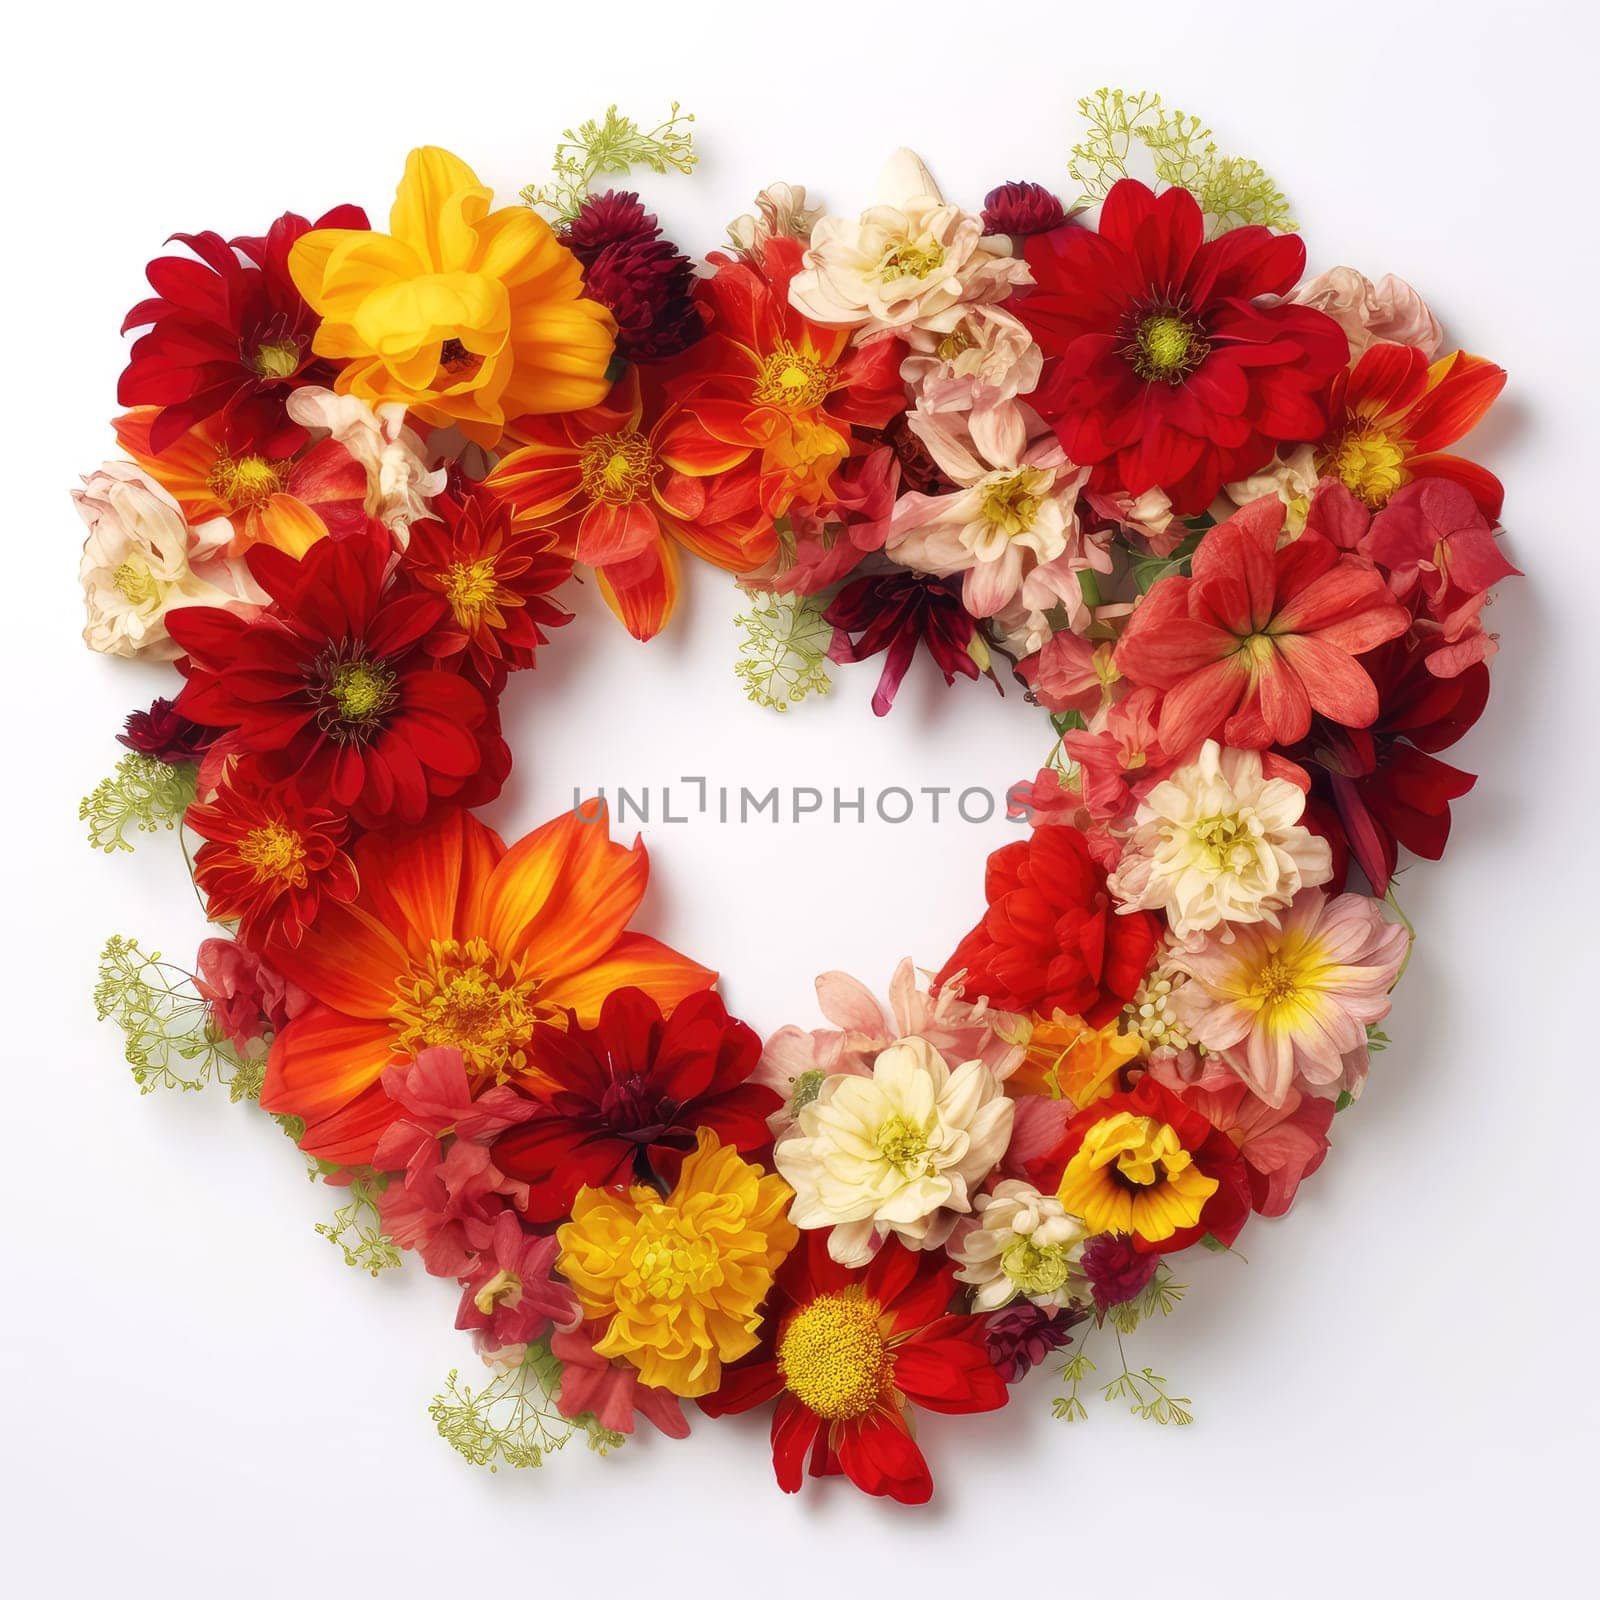 Flowers wreath in the shape of heart on white background. Romantic template for cards, invitations, etc. AI generated